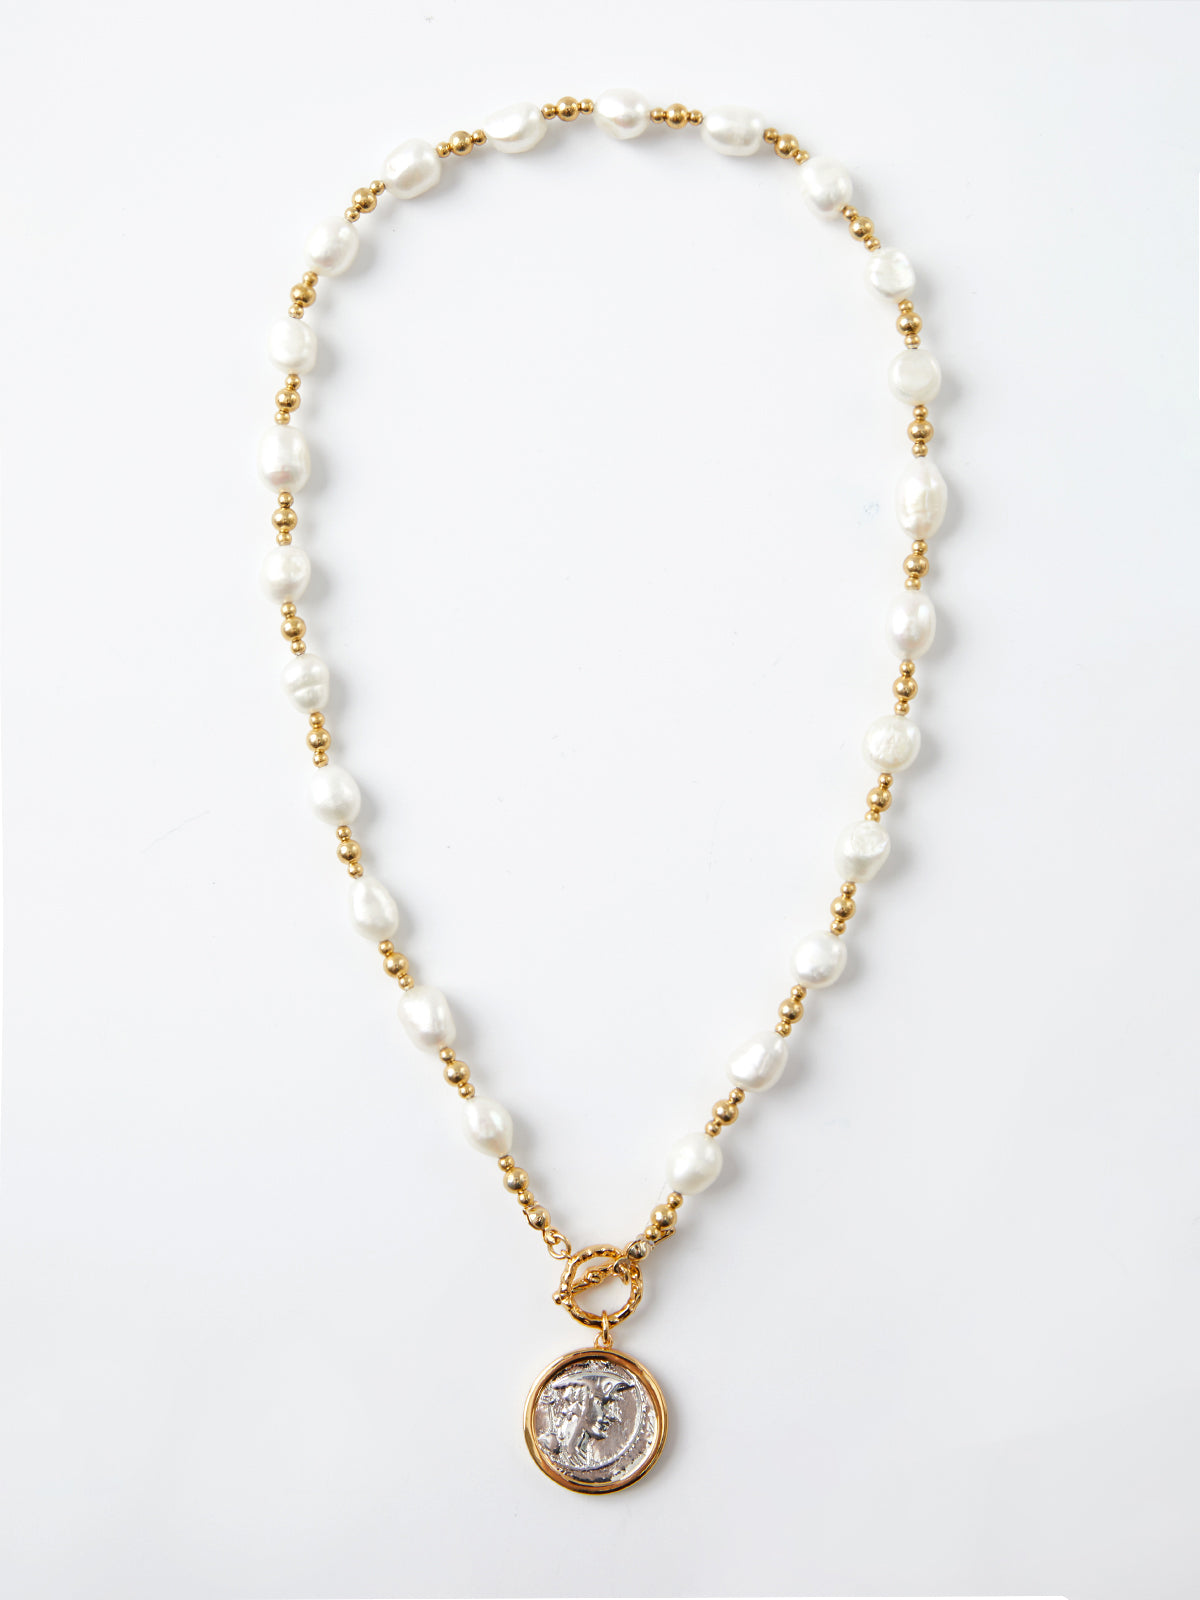 Baroque Pearl Gold Coin Necklace